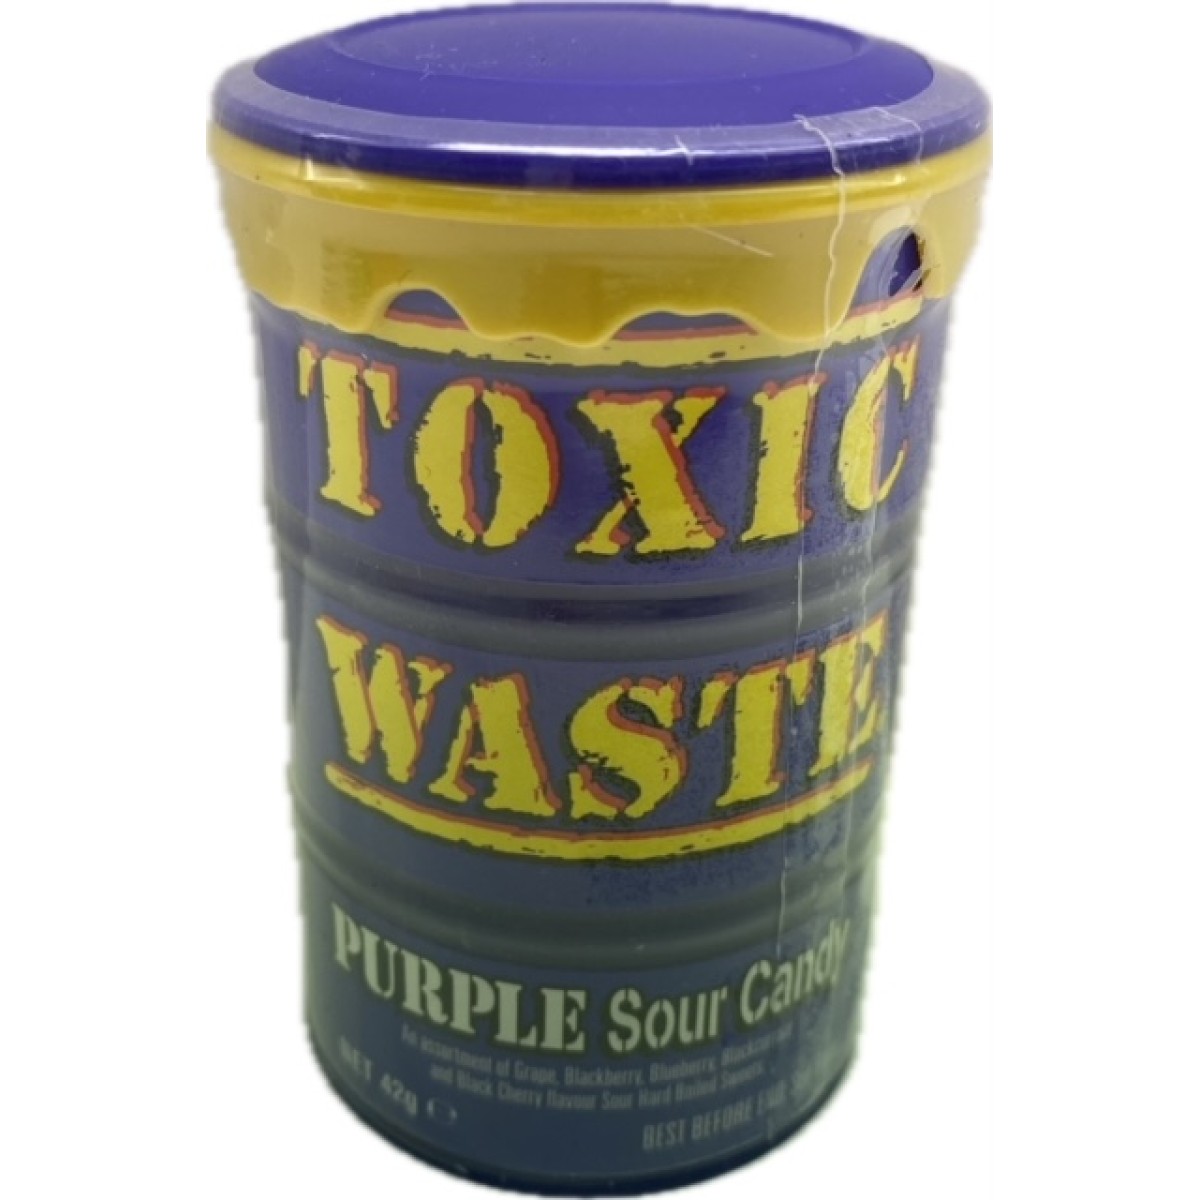 Toxic waste purple sour candy